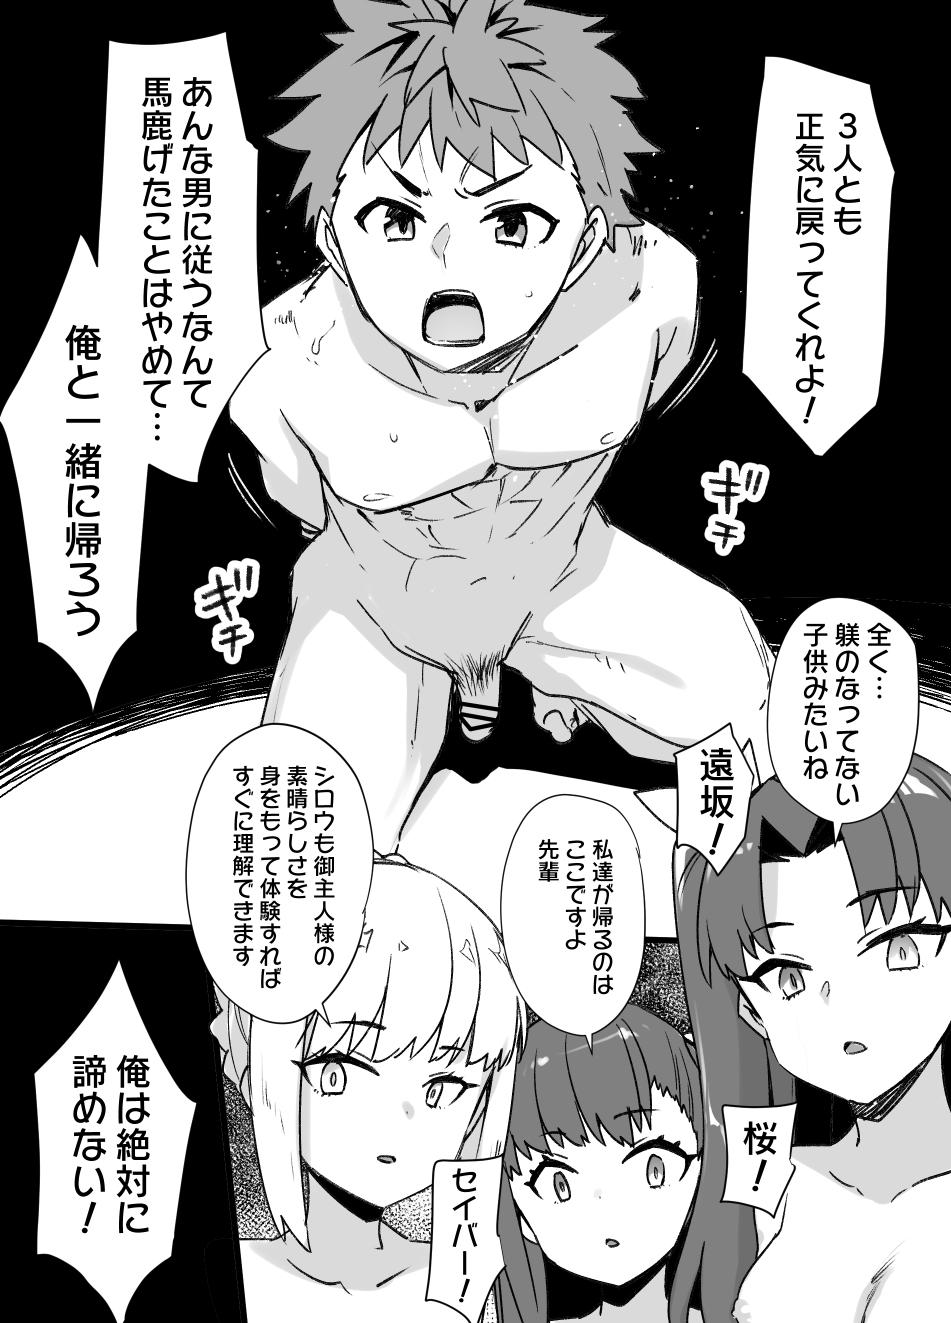 A manga about Shirou Emiya who went to save Rin Tohsaka from captivity and is transformed into a female slave through physical feminization and brainwashing[Fate/ stay night) 7